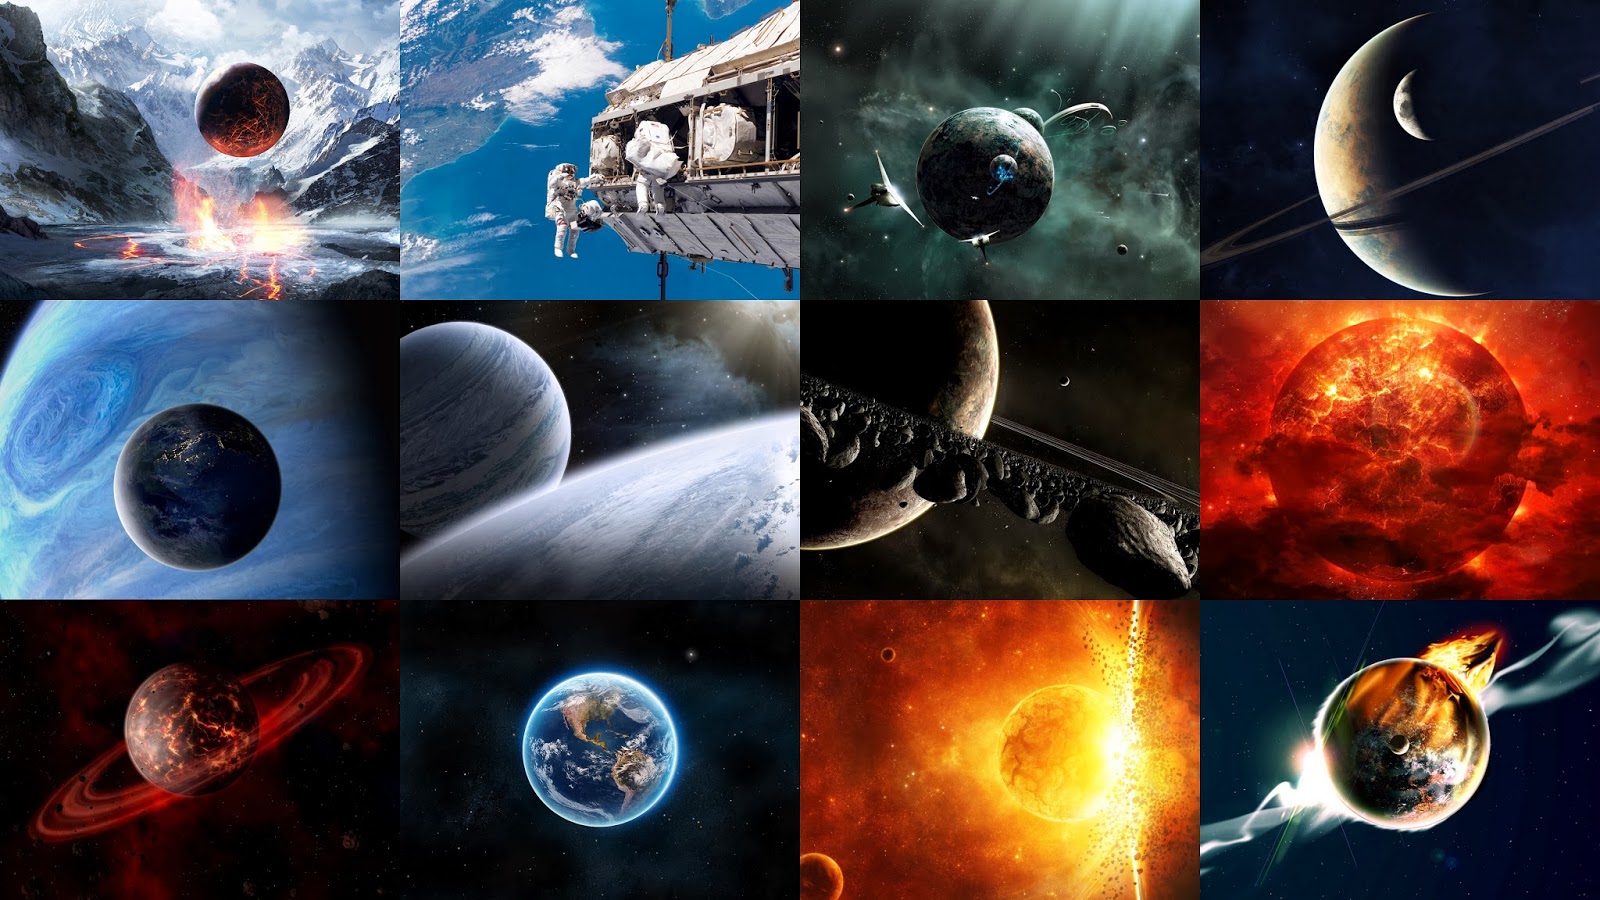 windows 10 wallpaper pack,outer space,planet,astronomical object,space,atmosphere